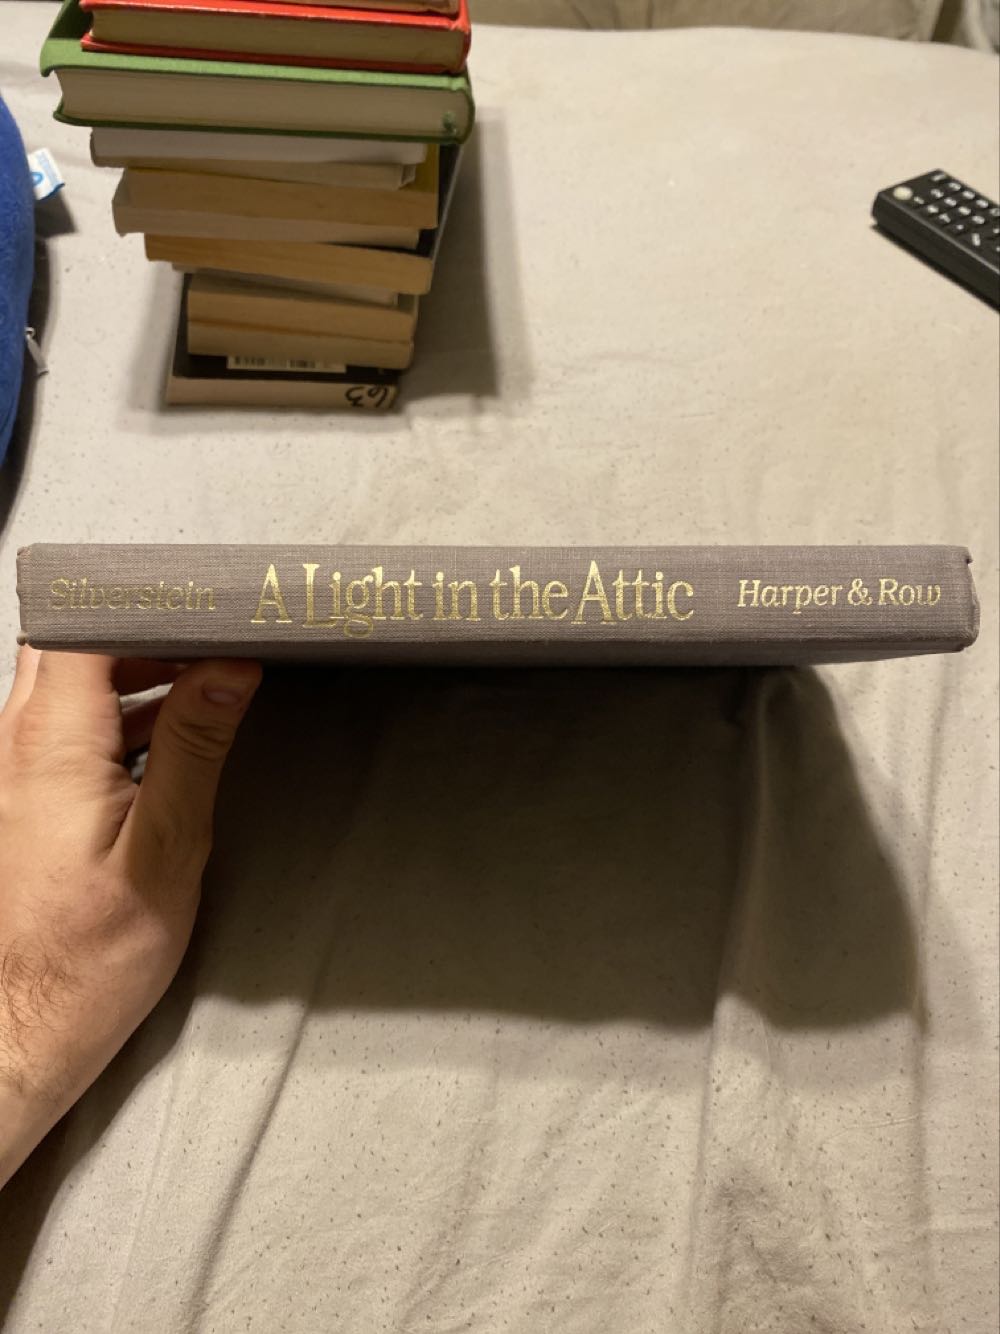 A Light In The Attic - Shel Silverstein (Harper & Row, Publishers - Hardcover) book collectible [Barcode 0060256737] - Main Image 3